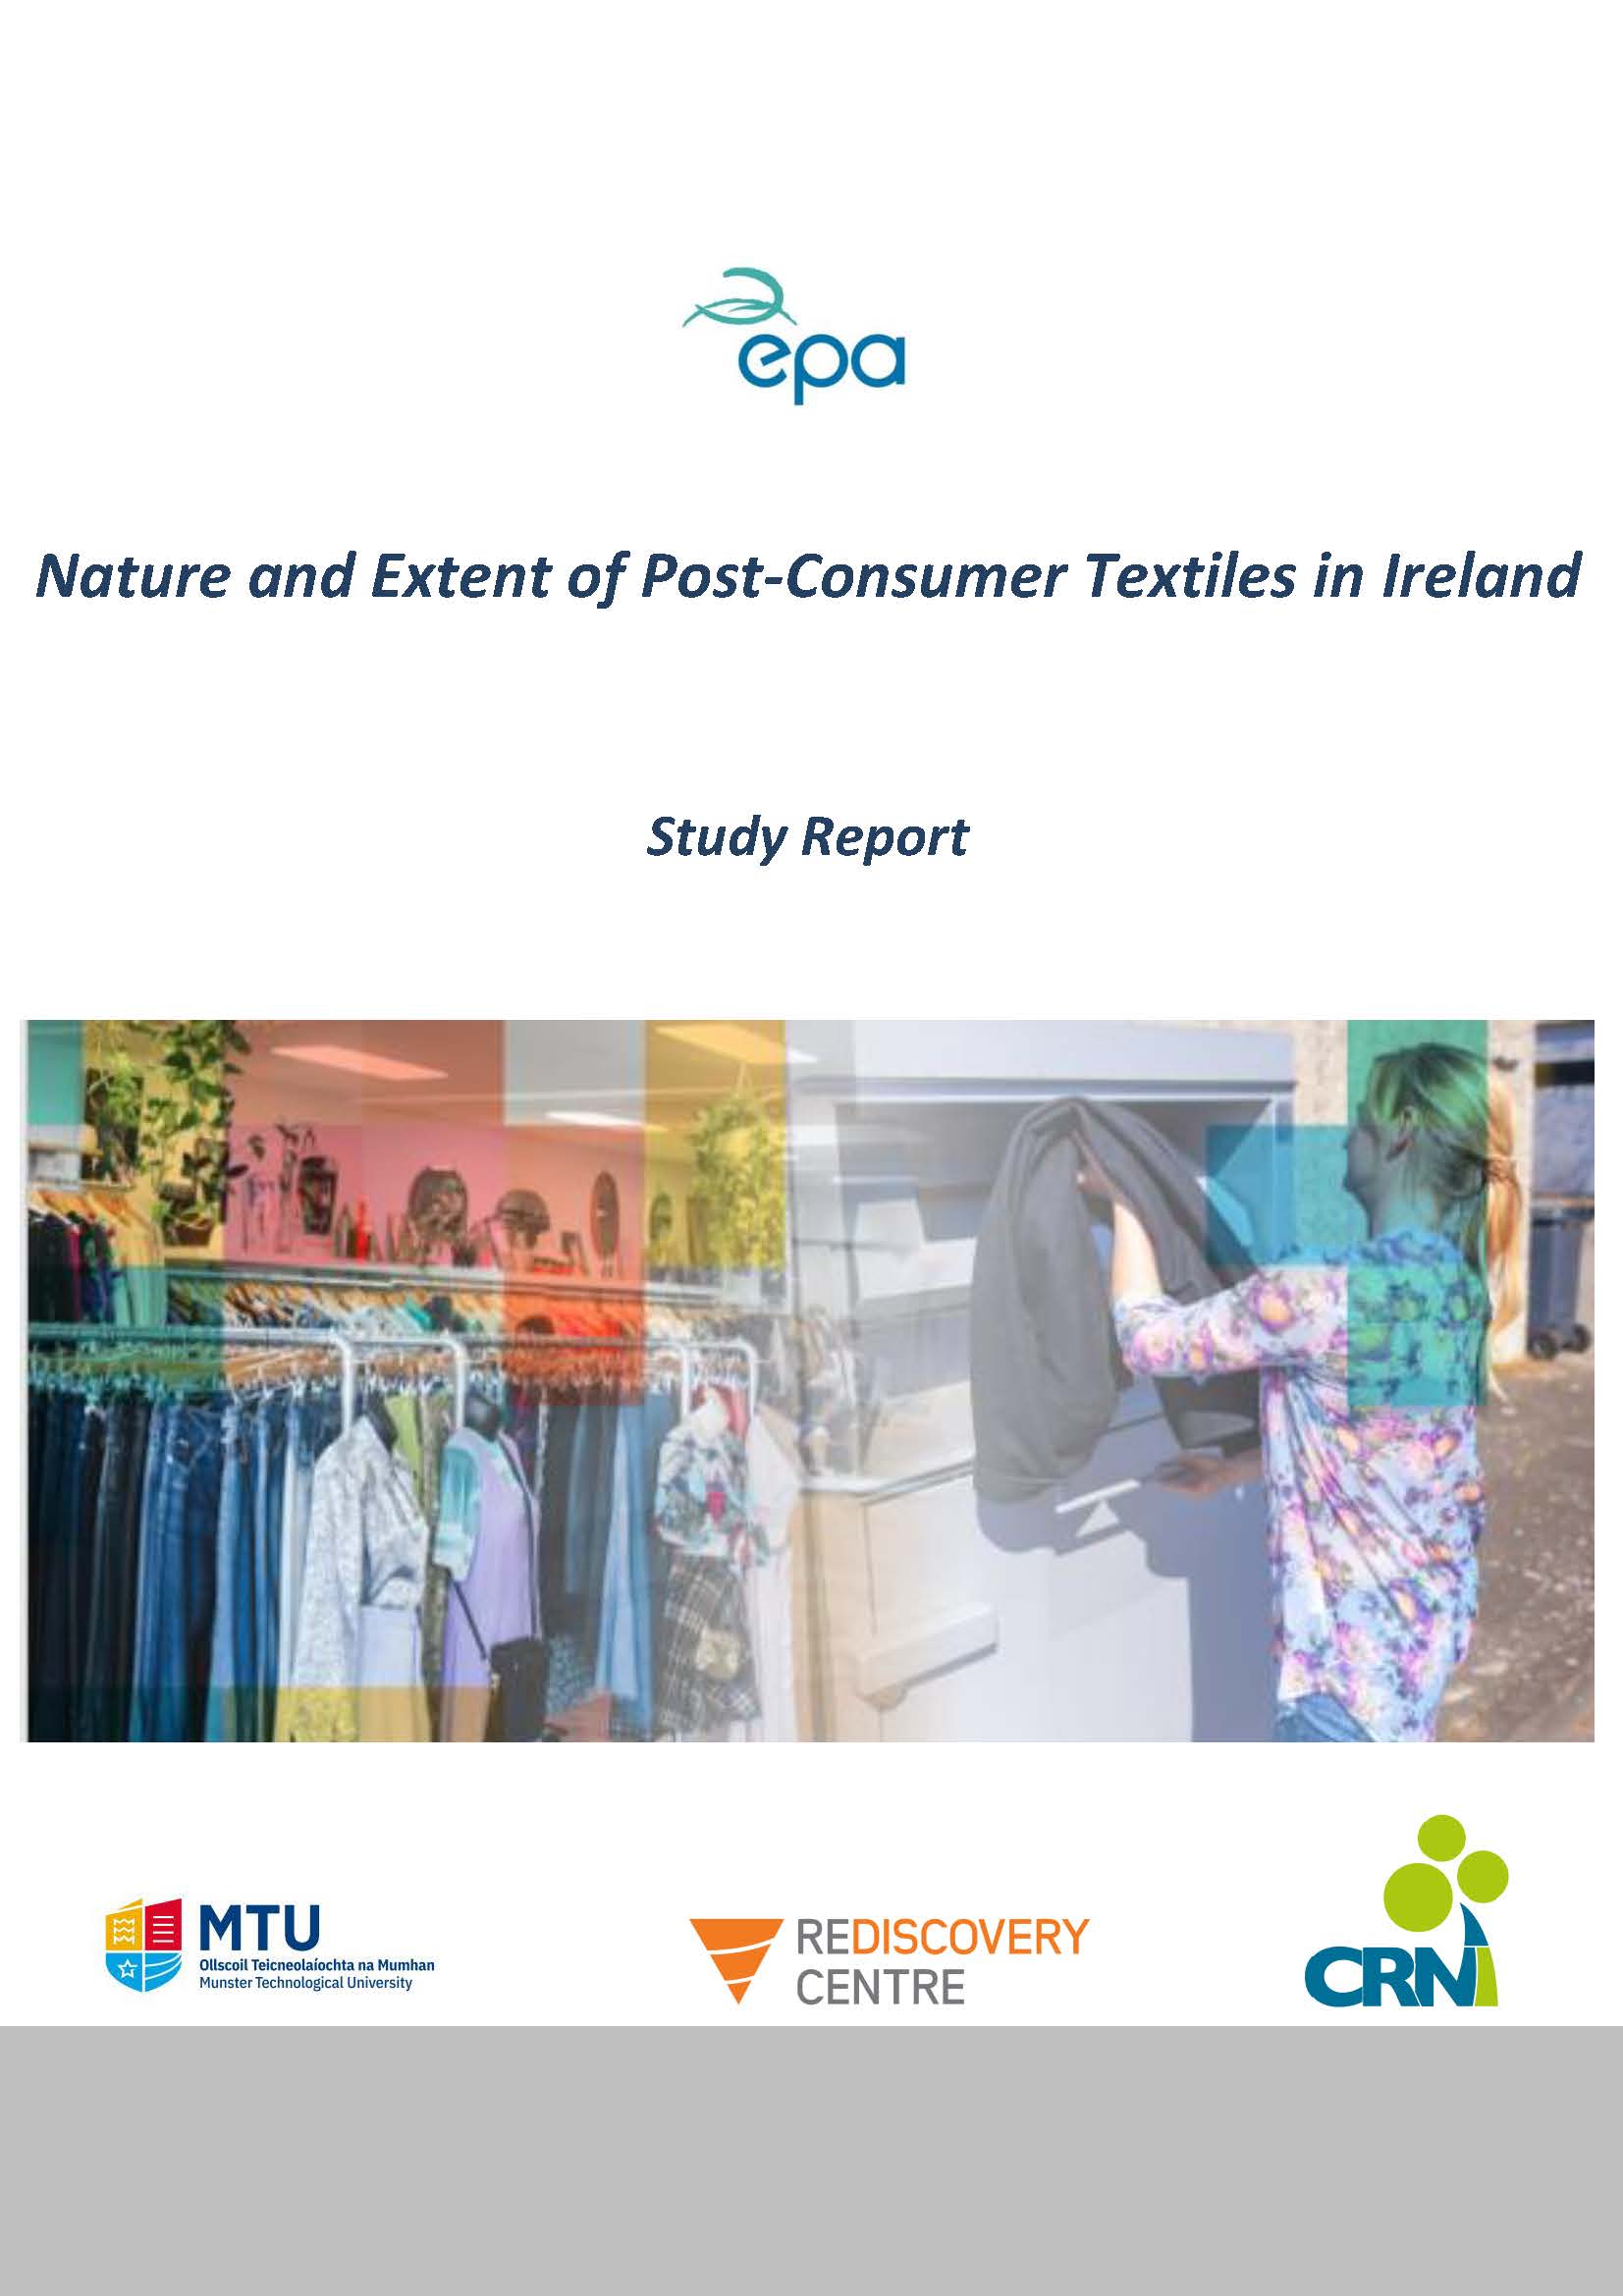 Nature and Extent of Post-Consumer Textiles in Ireland